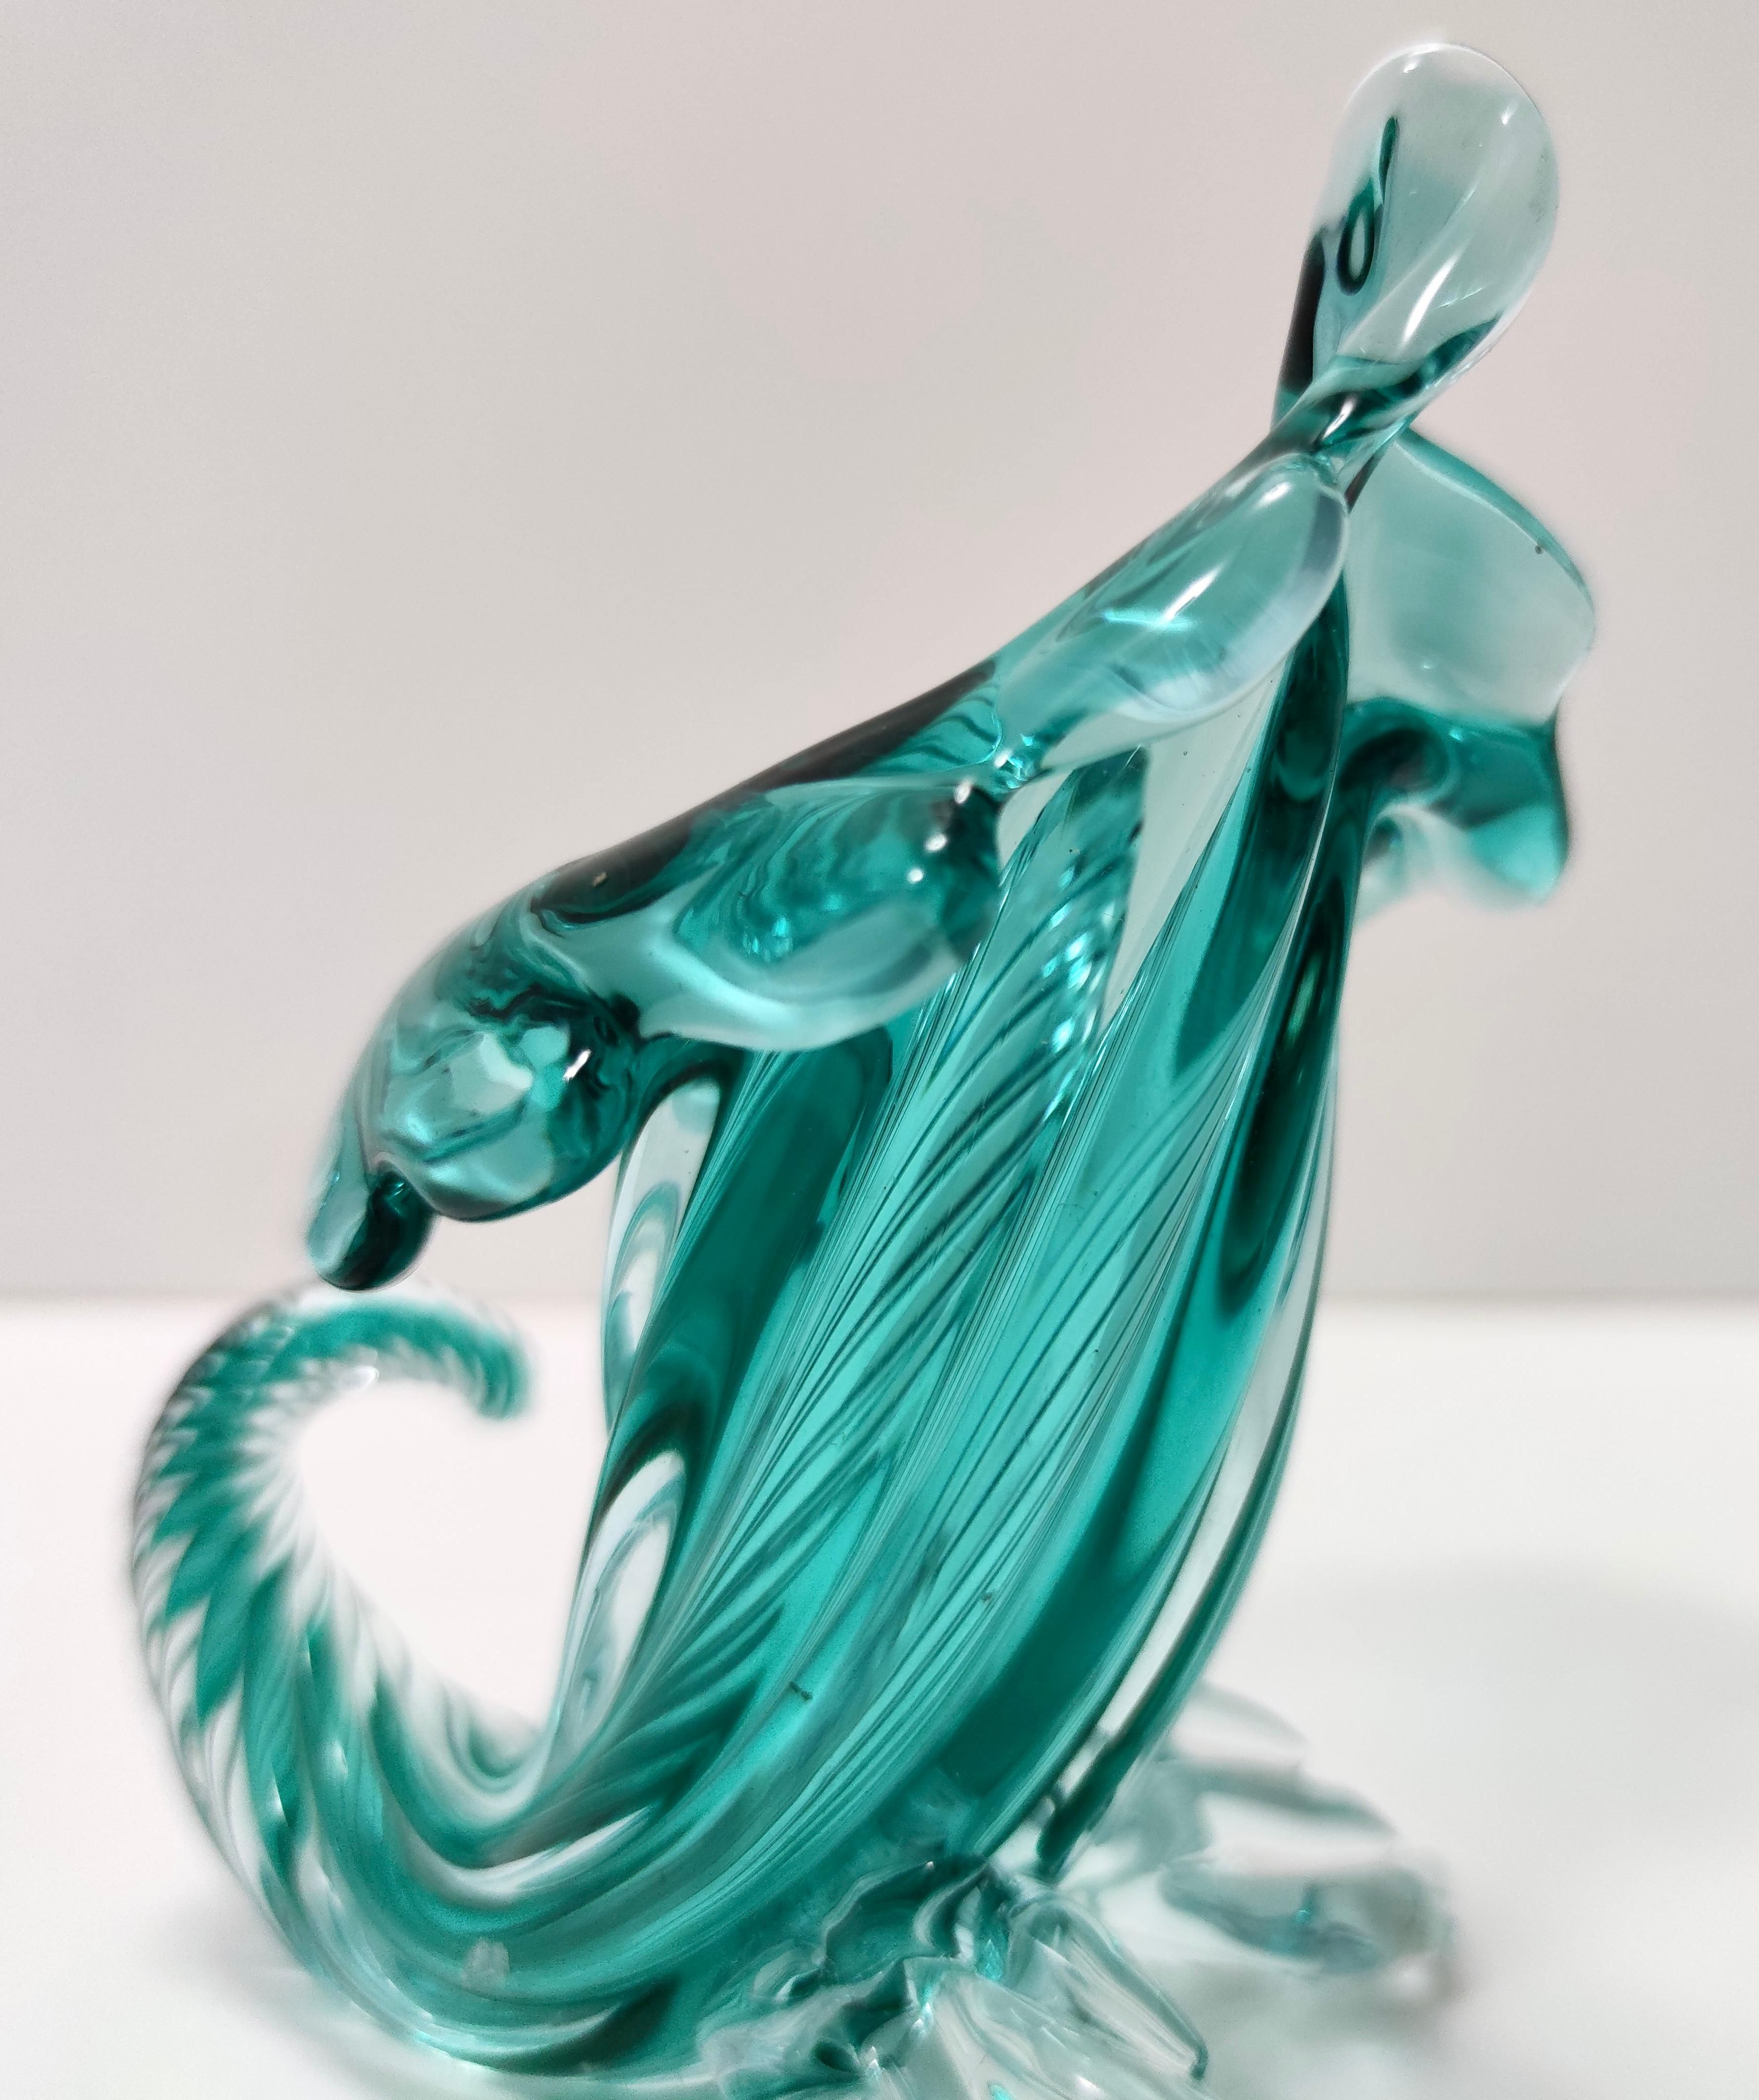 Vintage Teal Murano Glass Cornucopia Vase by Archimede Seguso, Italy For Sale 7